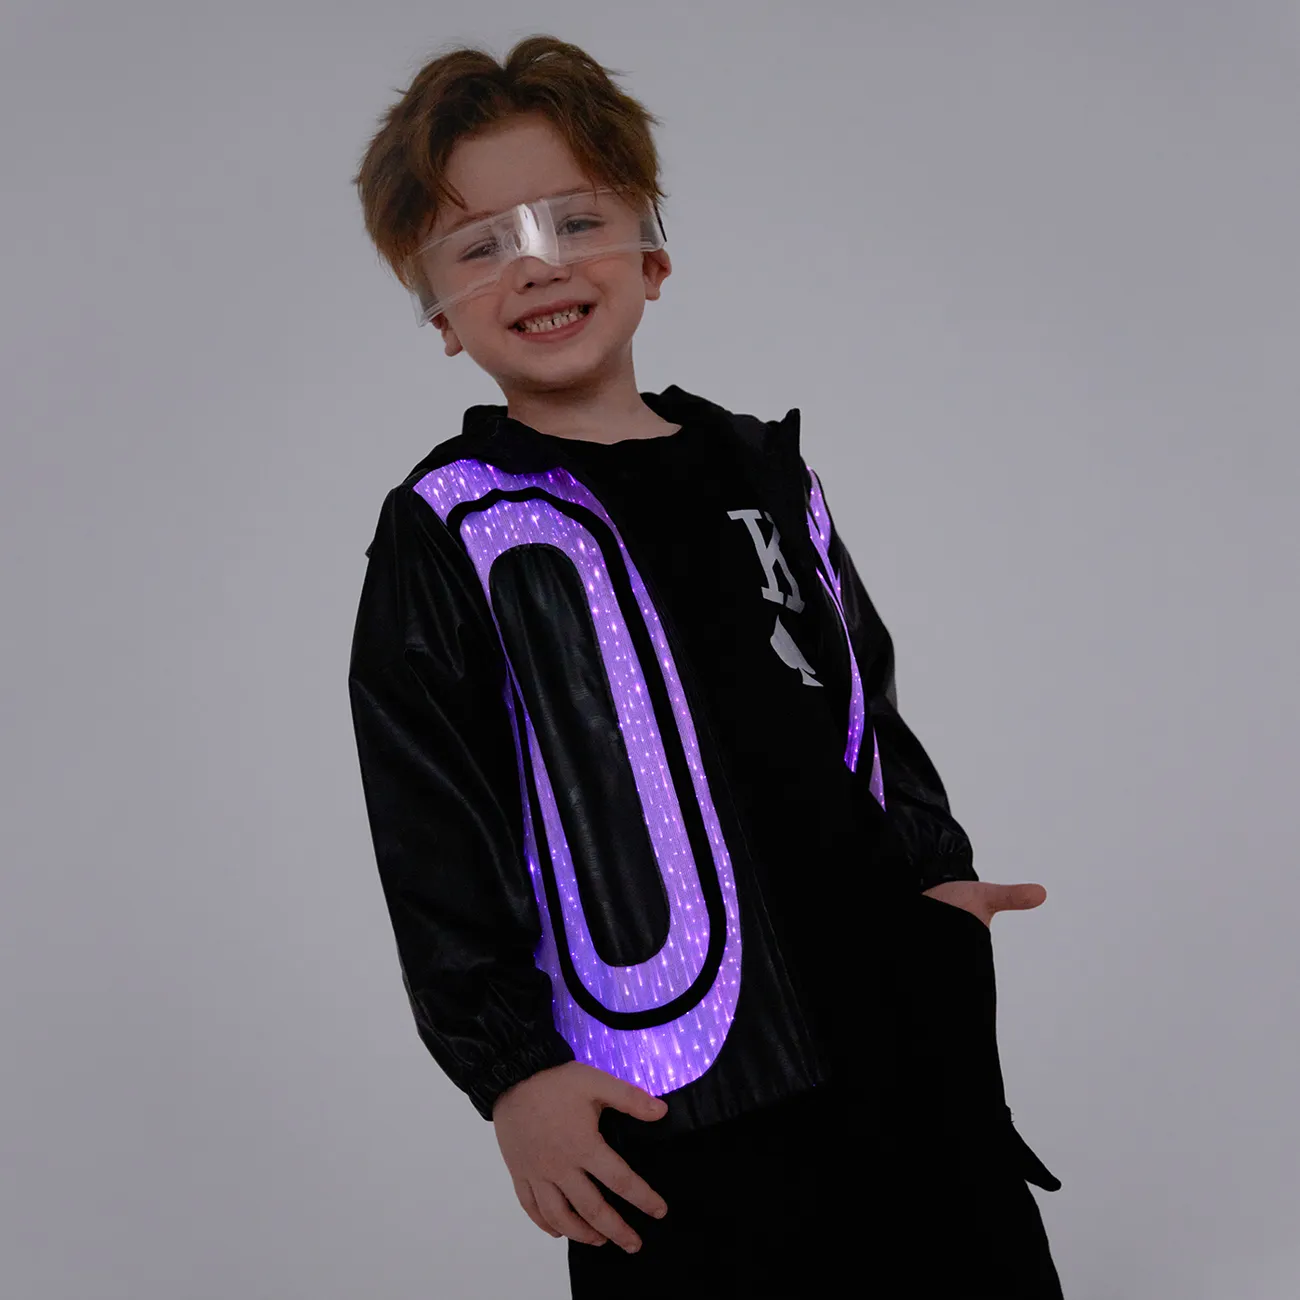 Go-Glow Illuminating Jacket with Light Up OK Pattern Including Controller (Built-In Battery) BlackandWhite big image 1